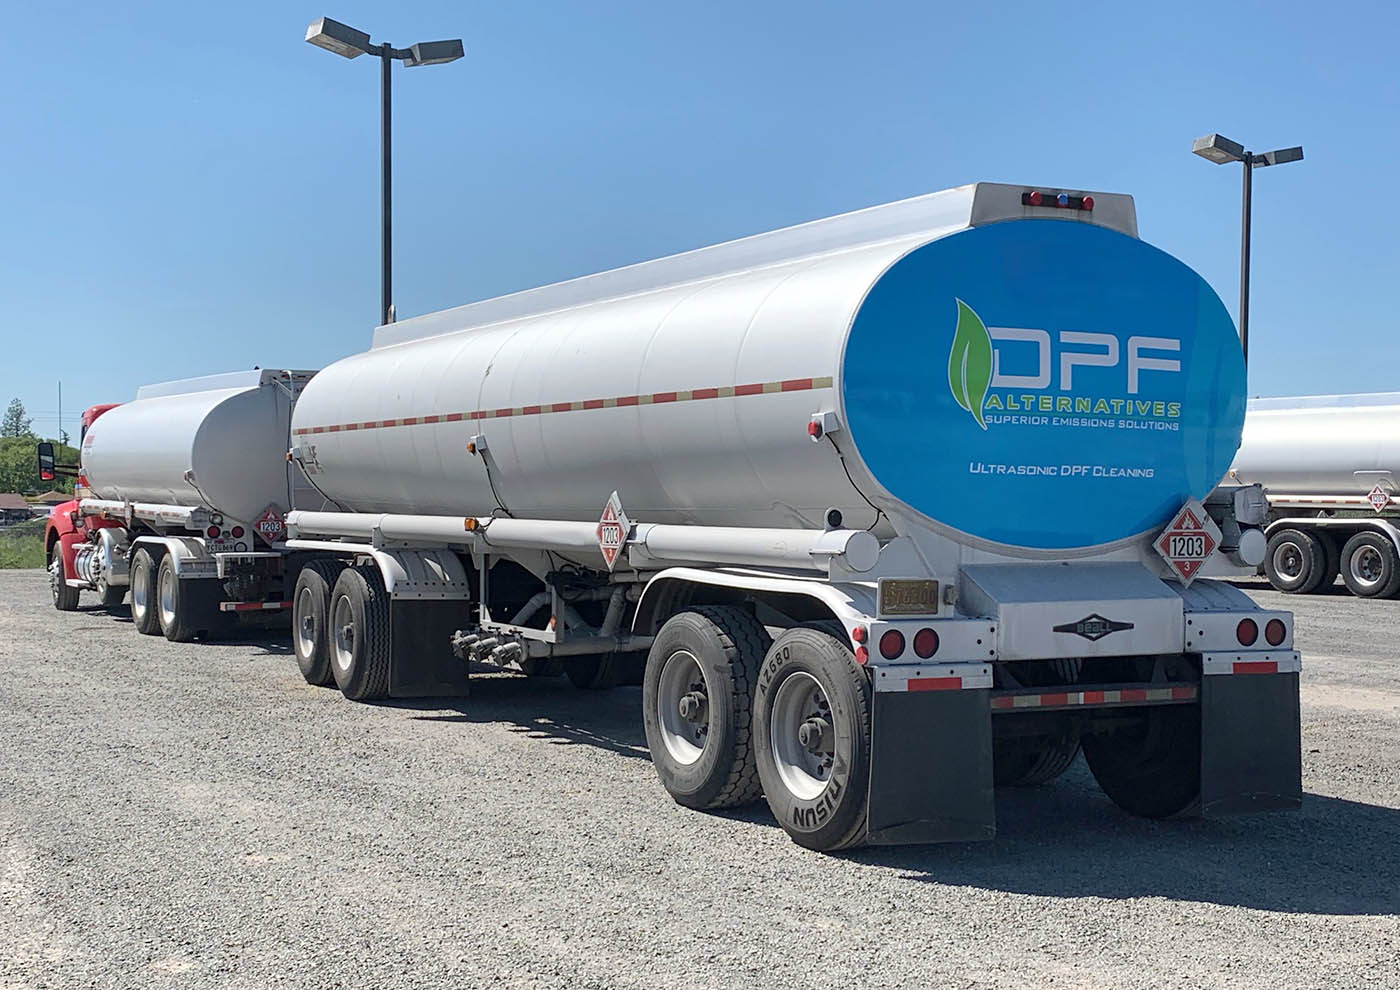 Back of a clean, large, reflective semi truck rig, contact DPF Alternatives for a DPF cleaning in Benton / Marshall County.